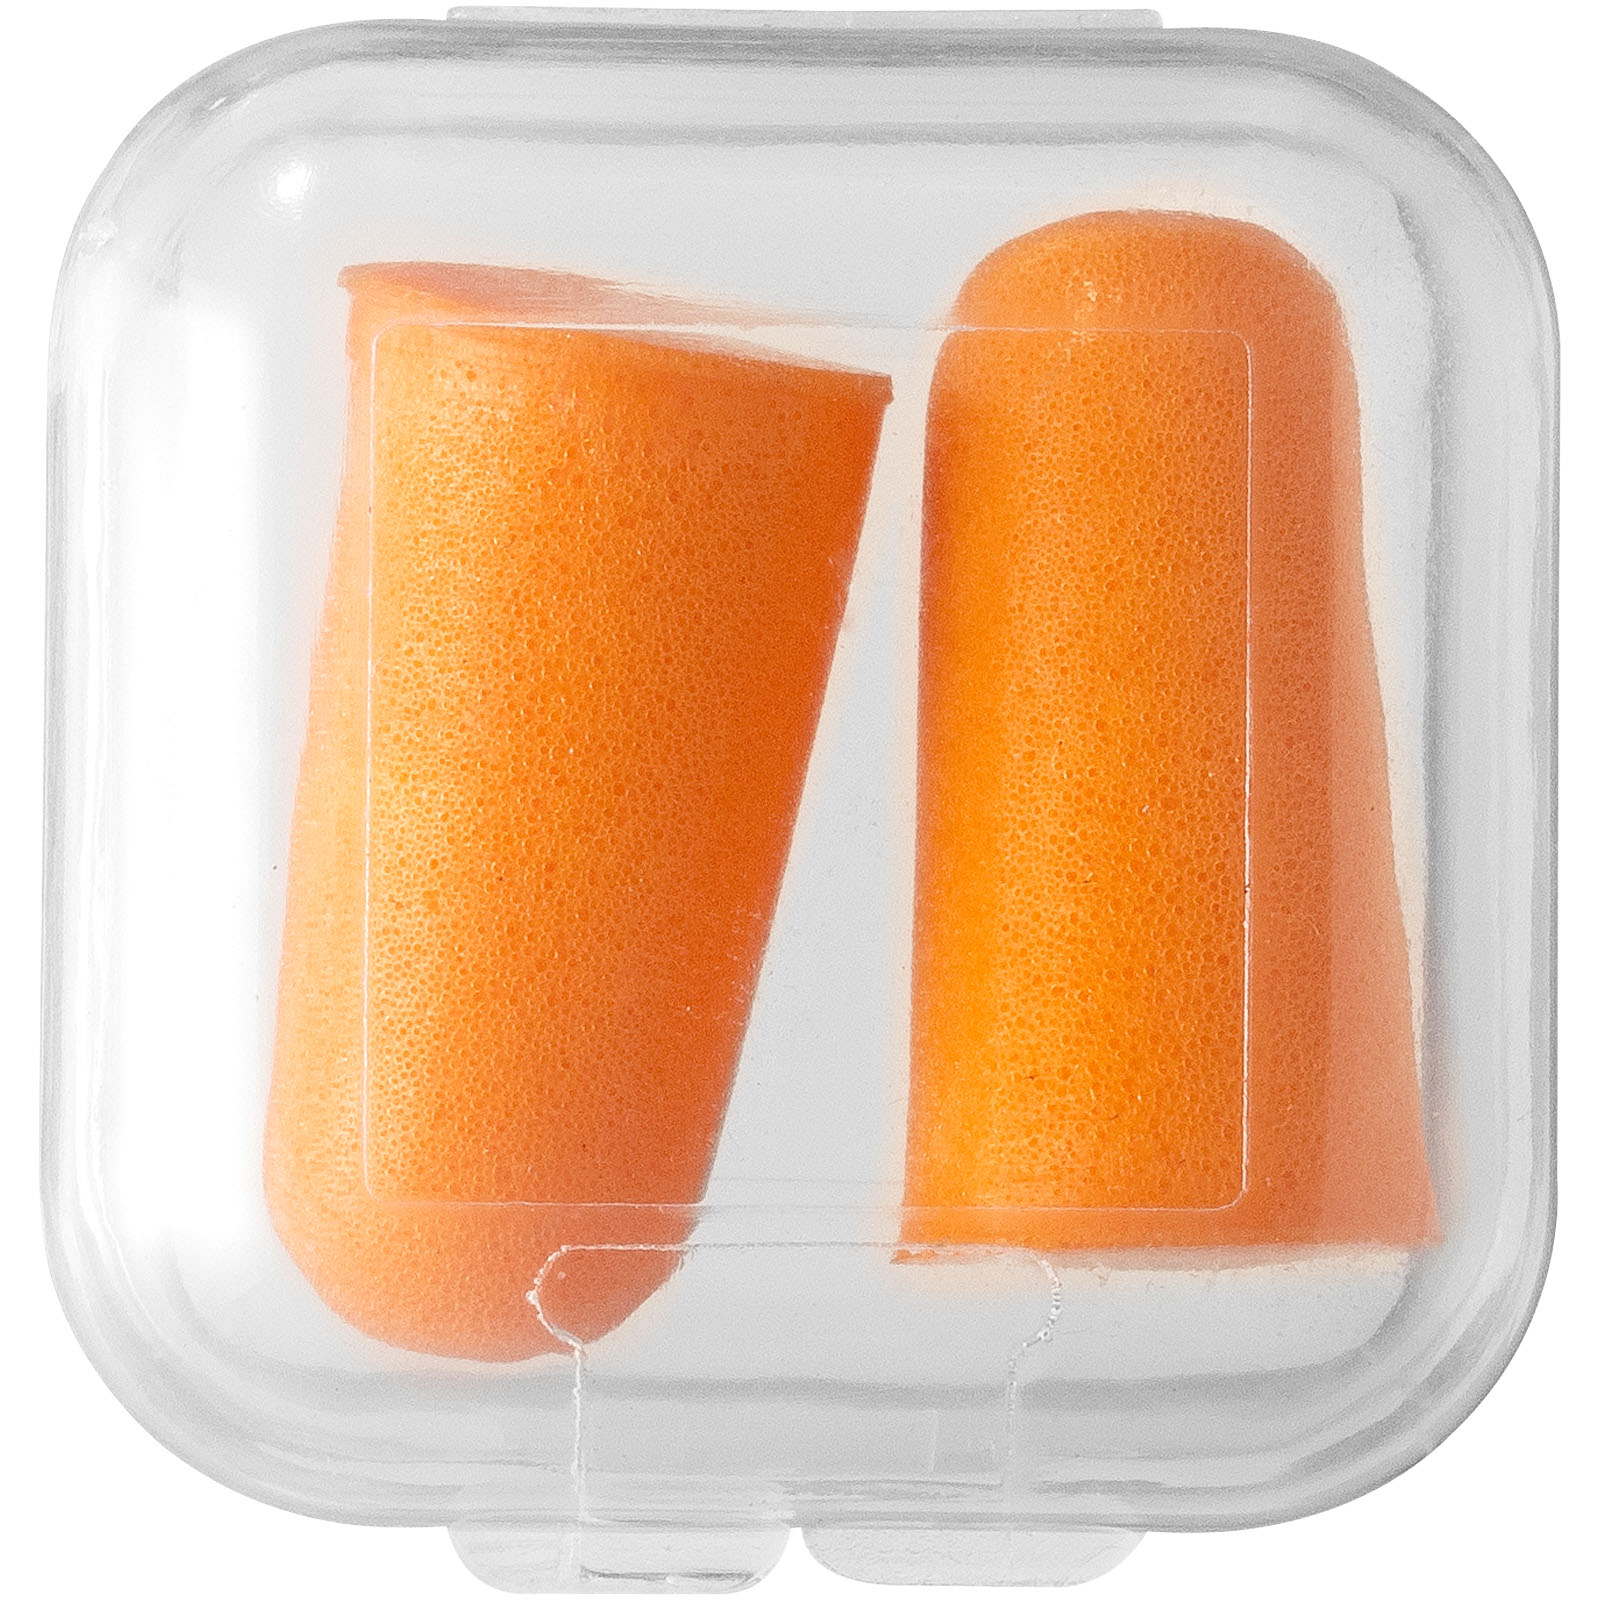 Advertising Travel Accessories - Serenity earplugs with travel case - 1